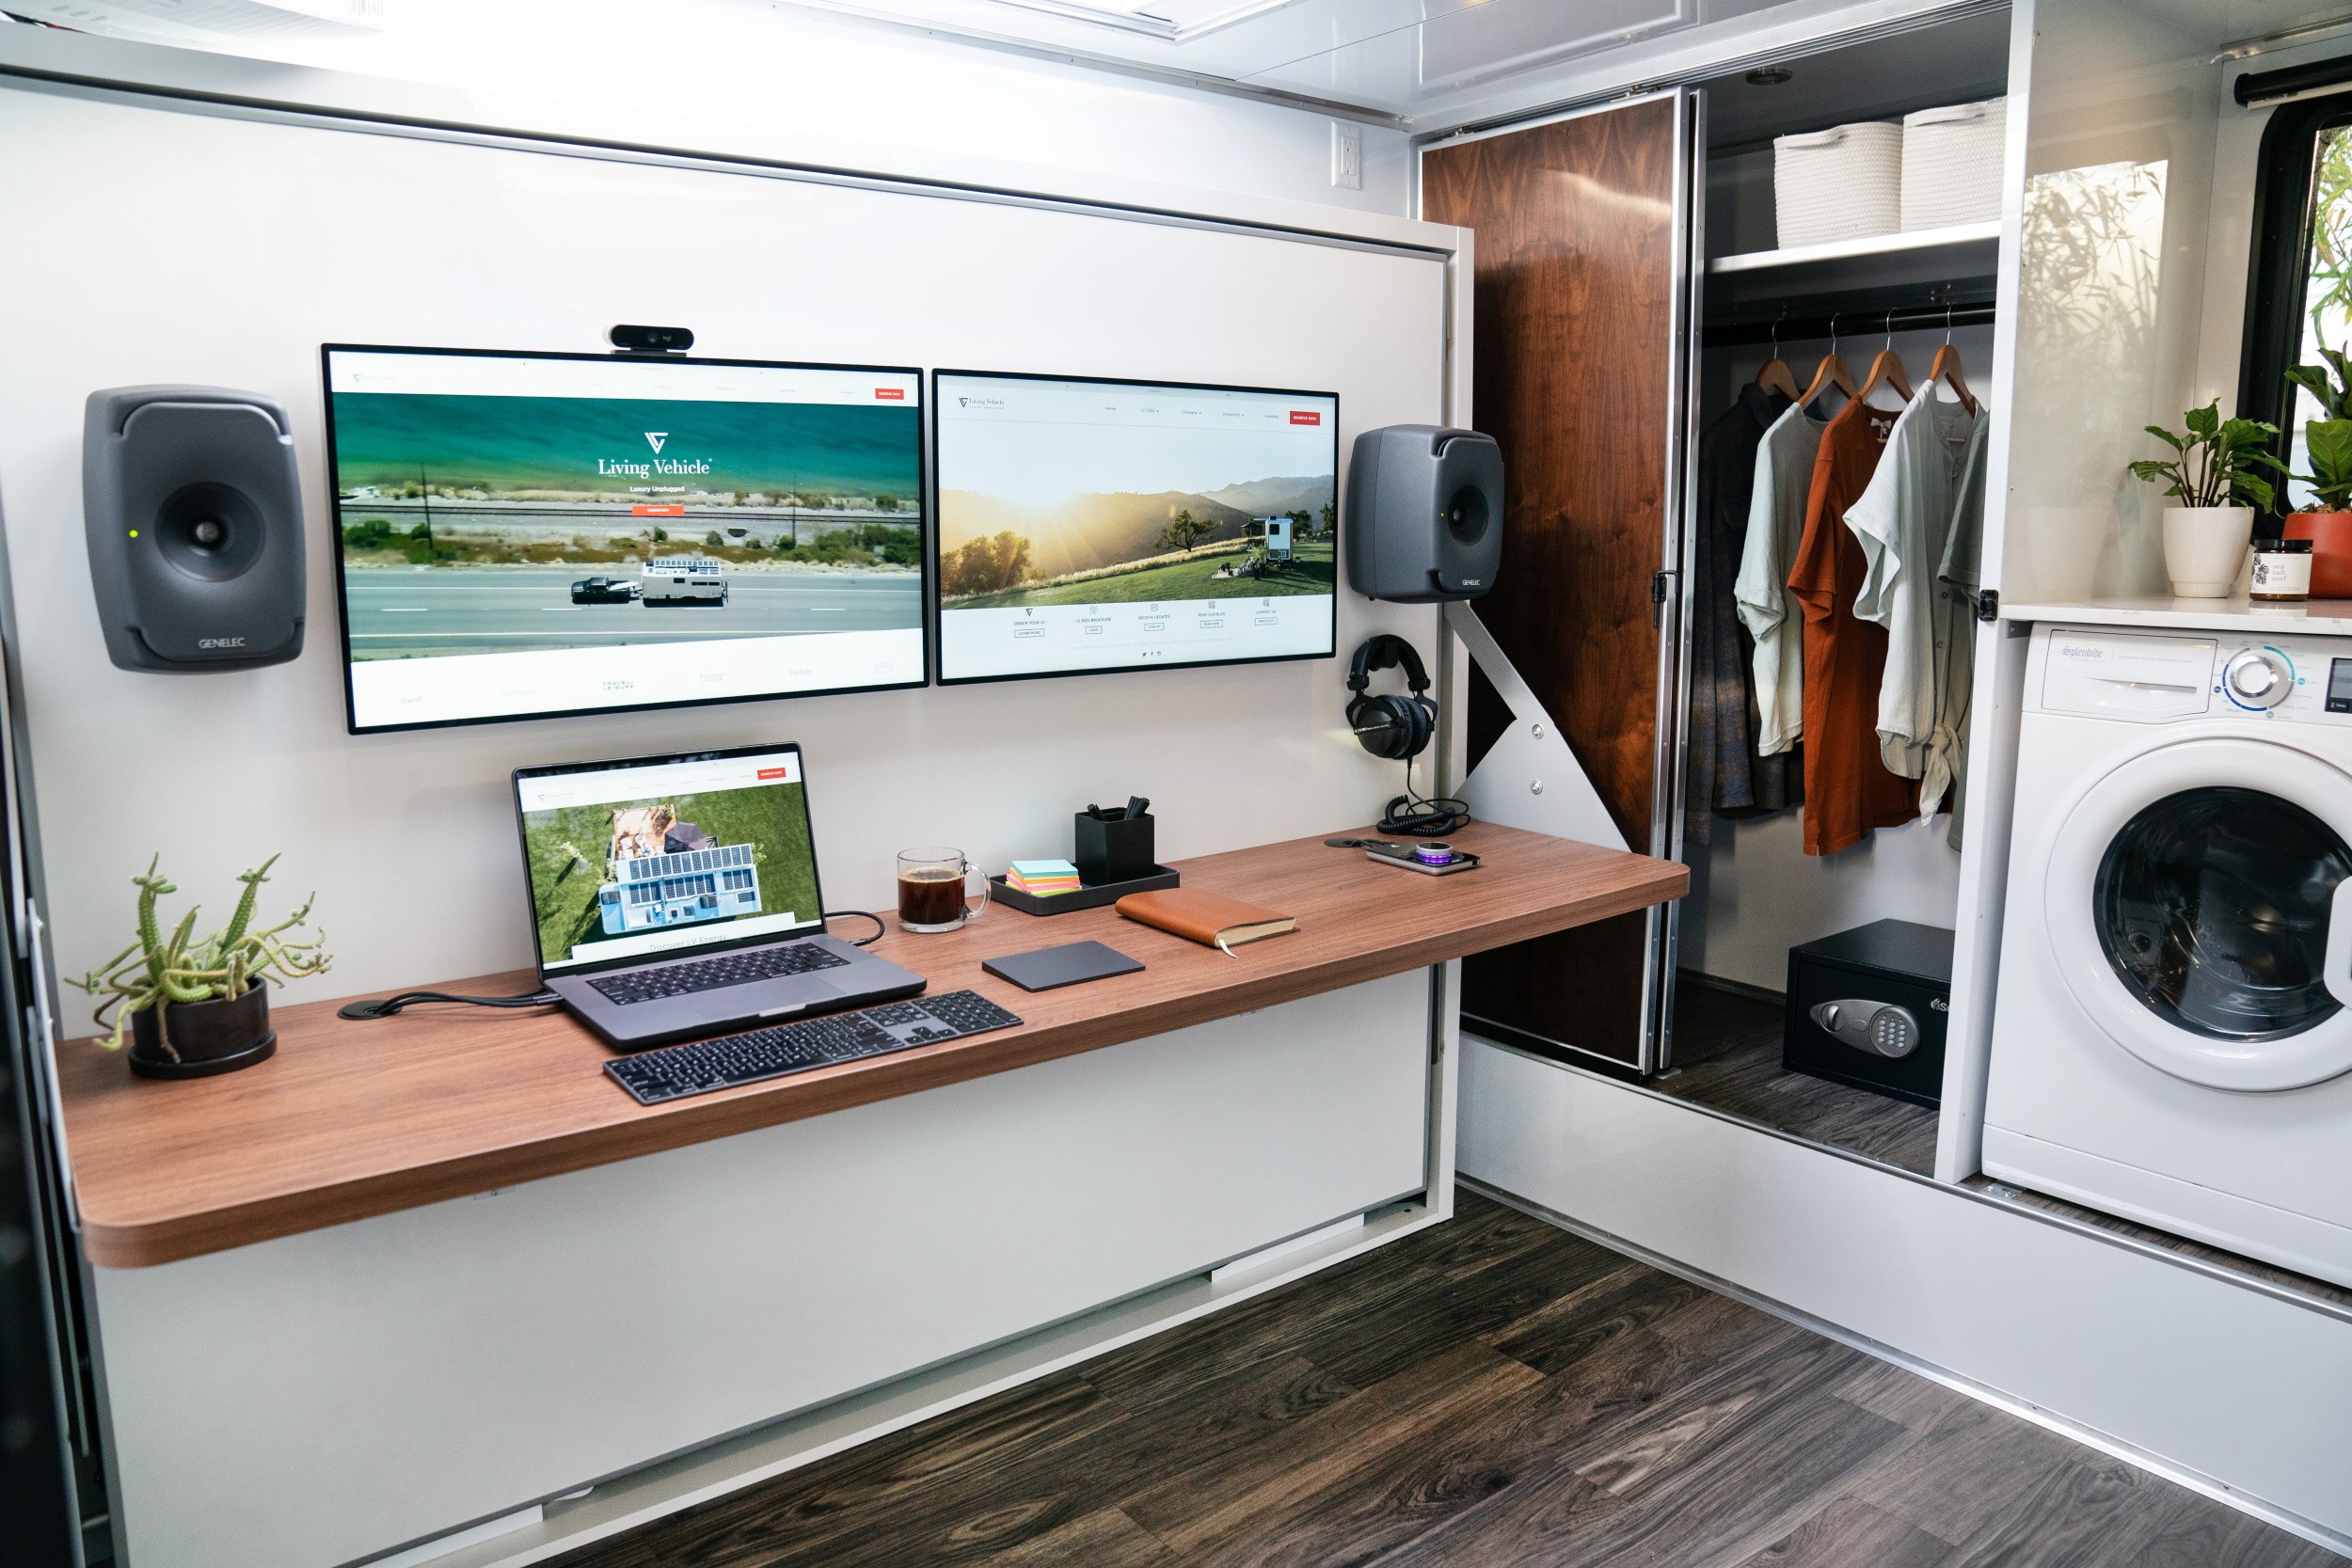 Louis Vuitton Deploys Fancy Trailers for Personalized At-Home Shopping -  autoevolution